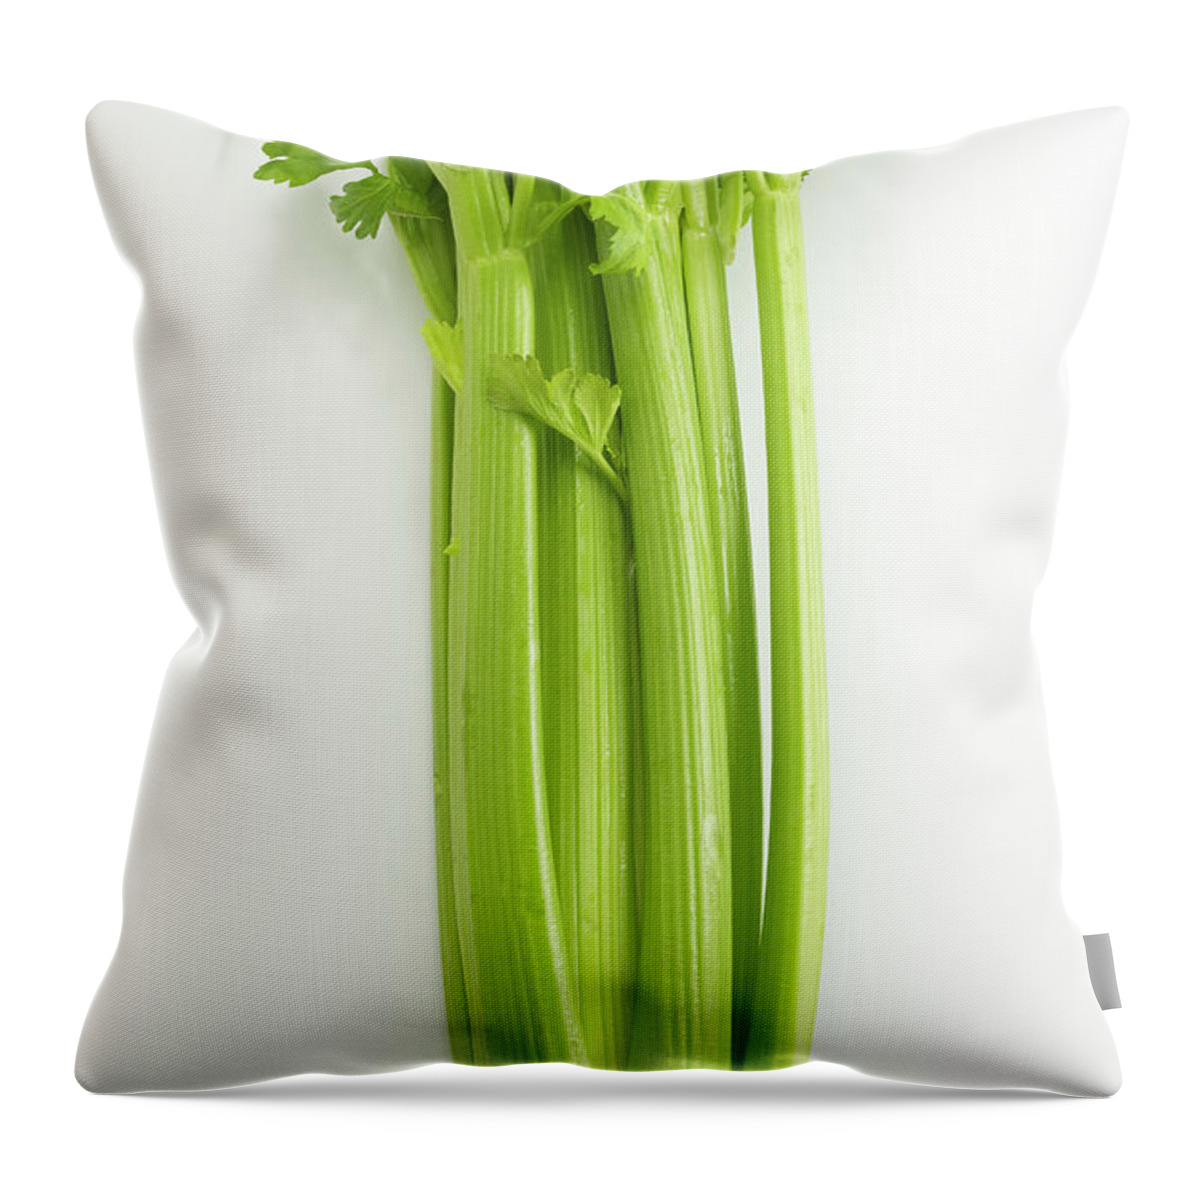 White Background Throw Pillow featuring the photograph Celery by David Bishop Inc.